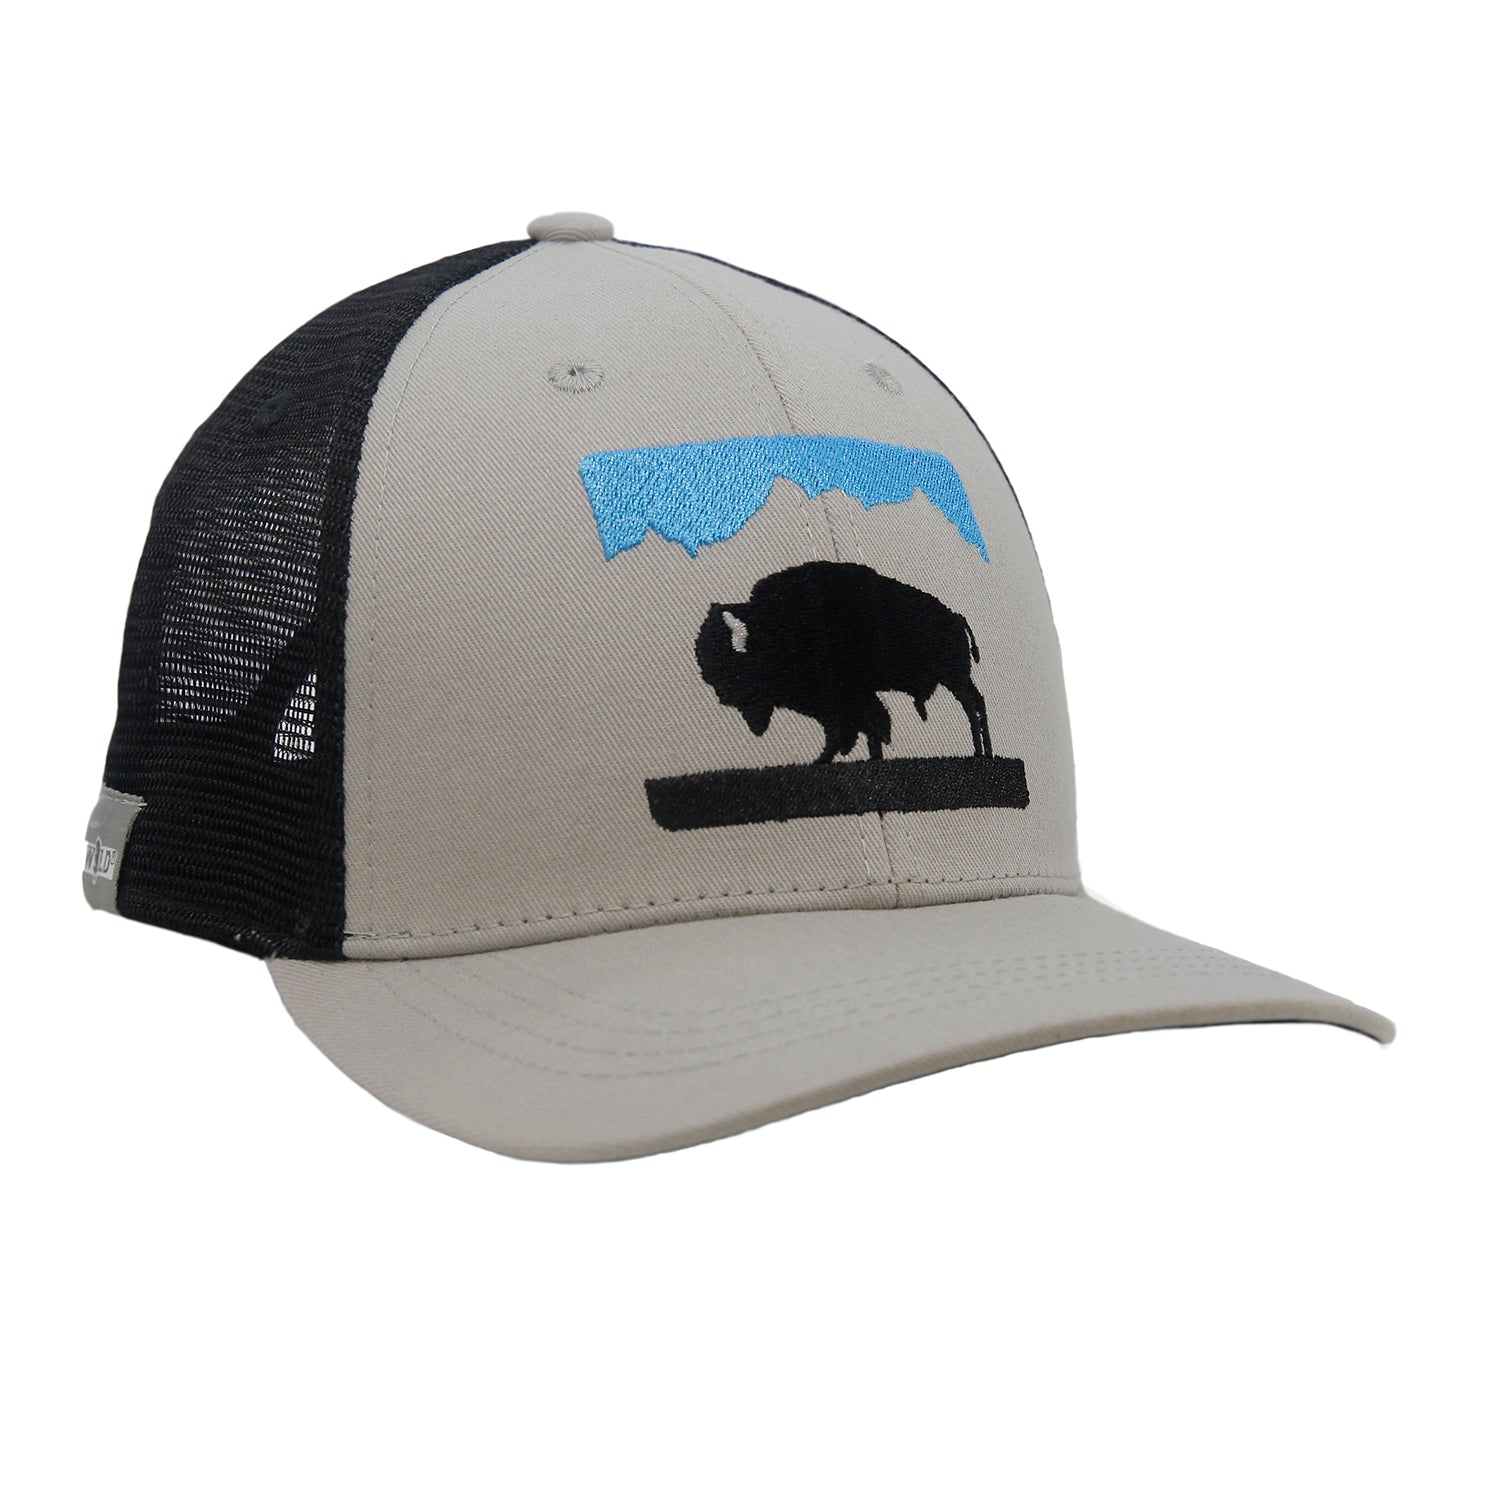 A hat with black mesh and gray fabric in front has an image of a bison under a blue sky